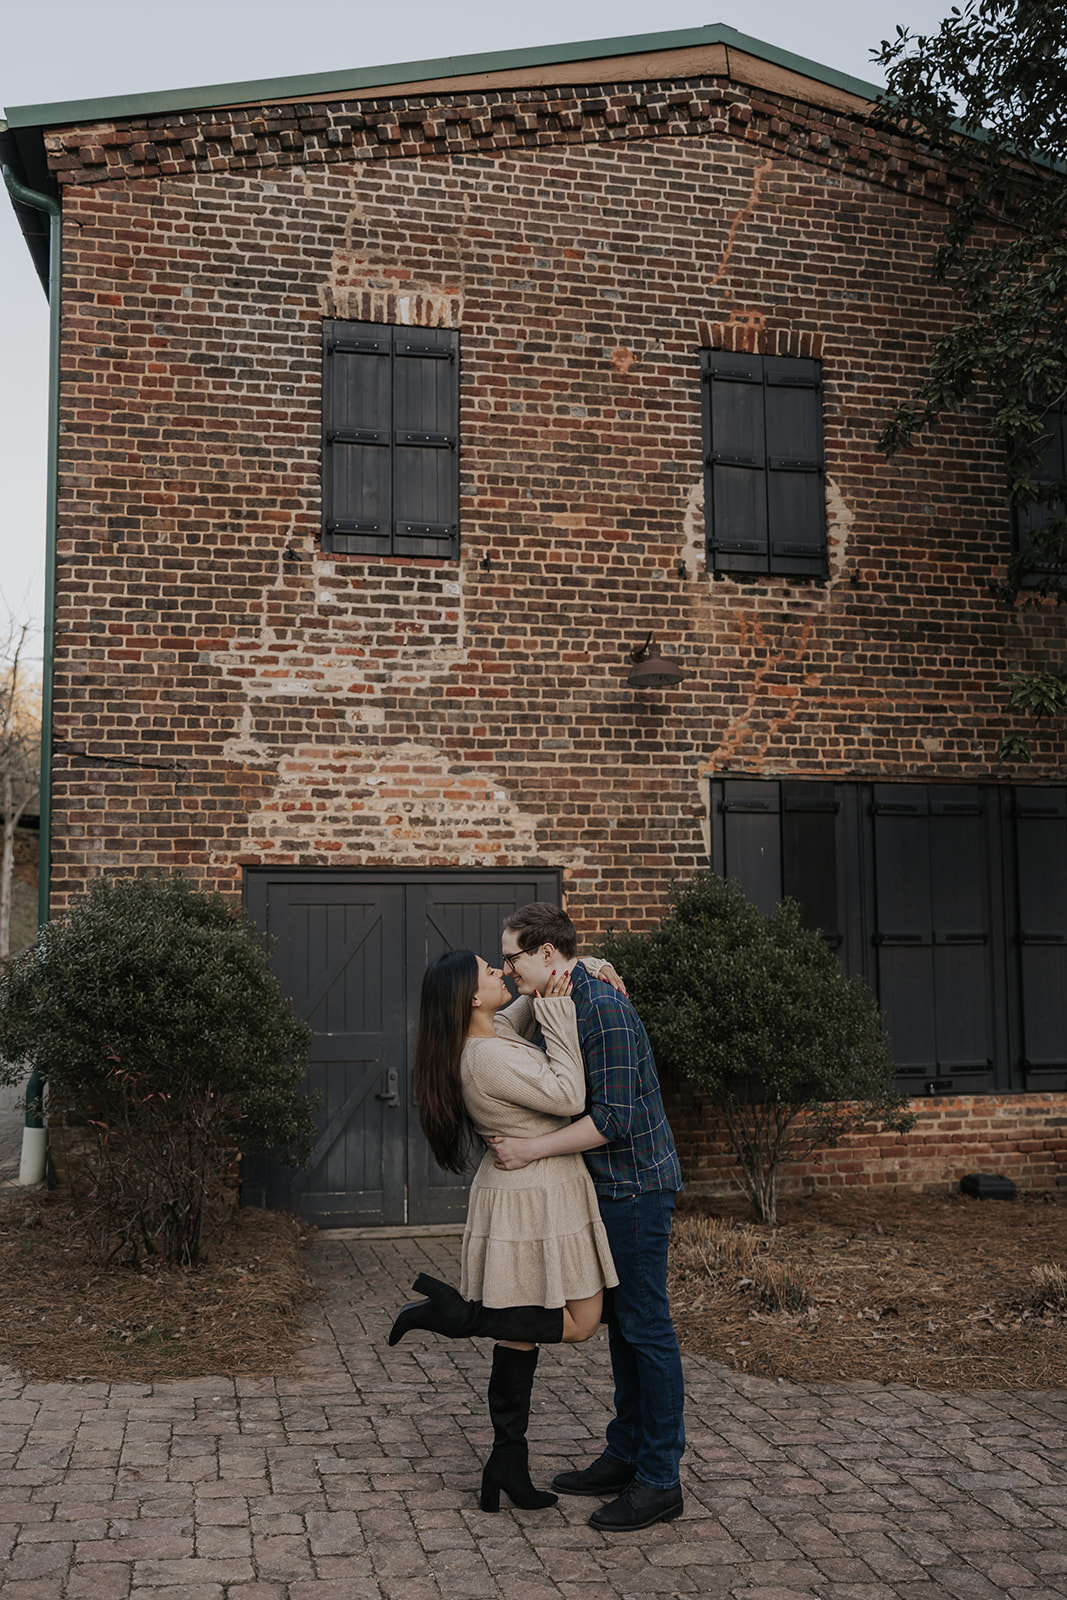 Beautiful couple pose together against a brick wall backdrop